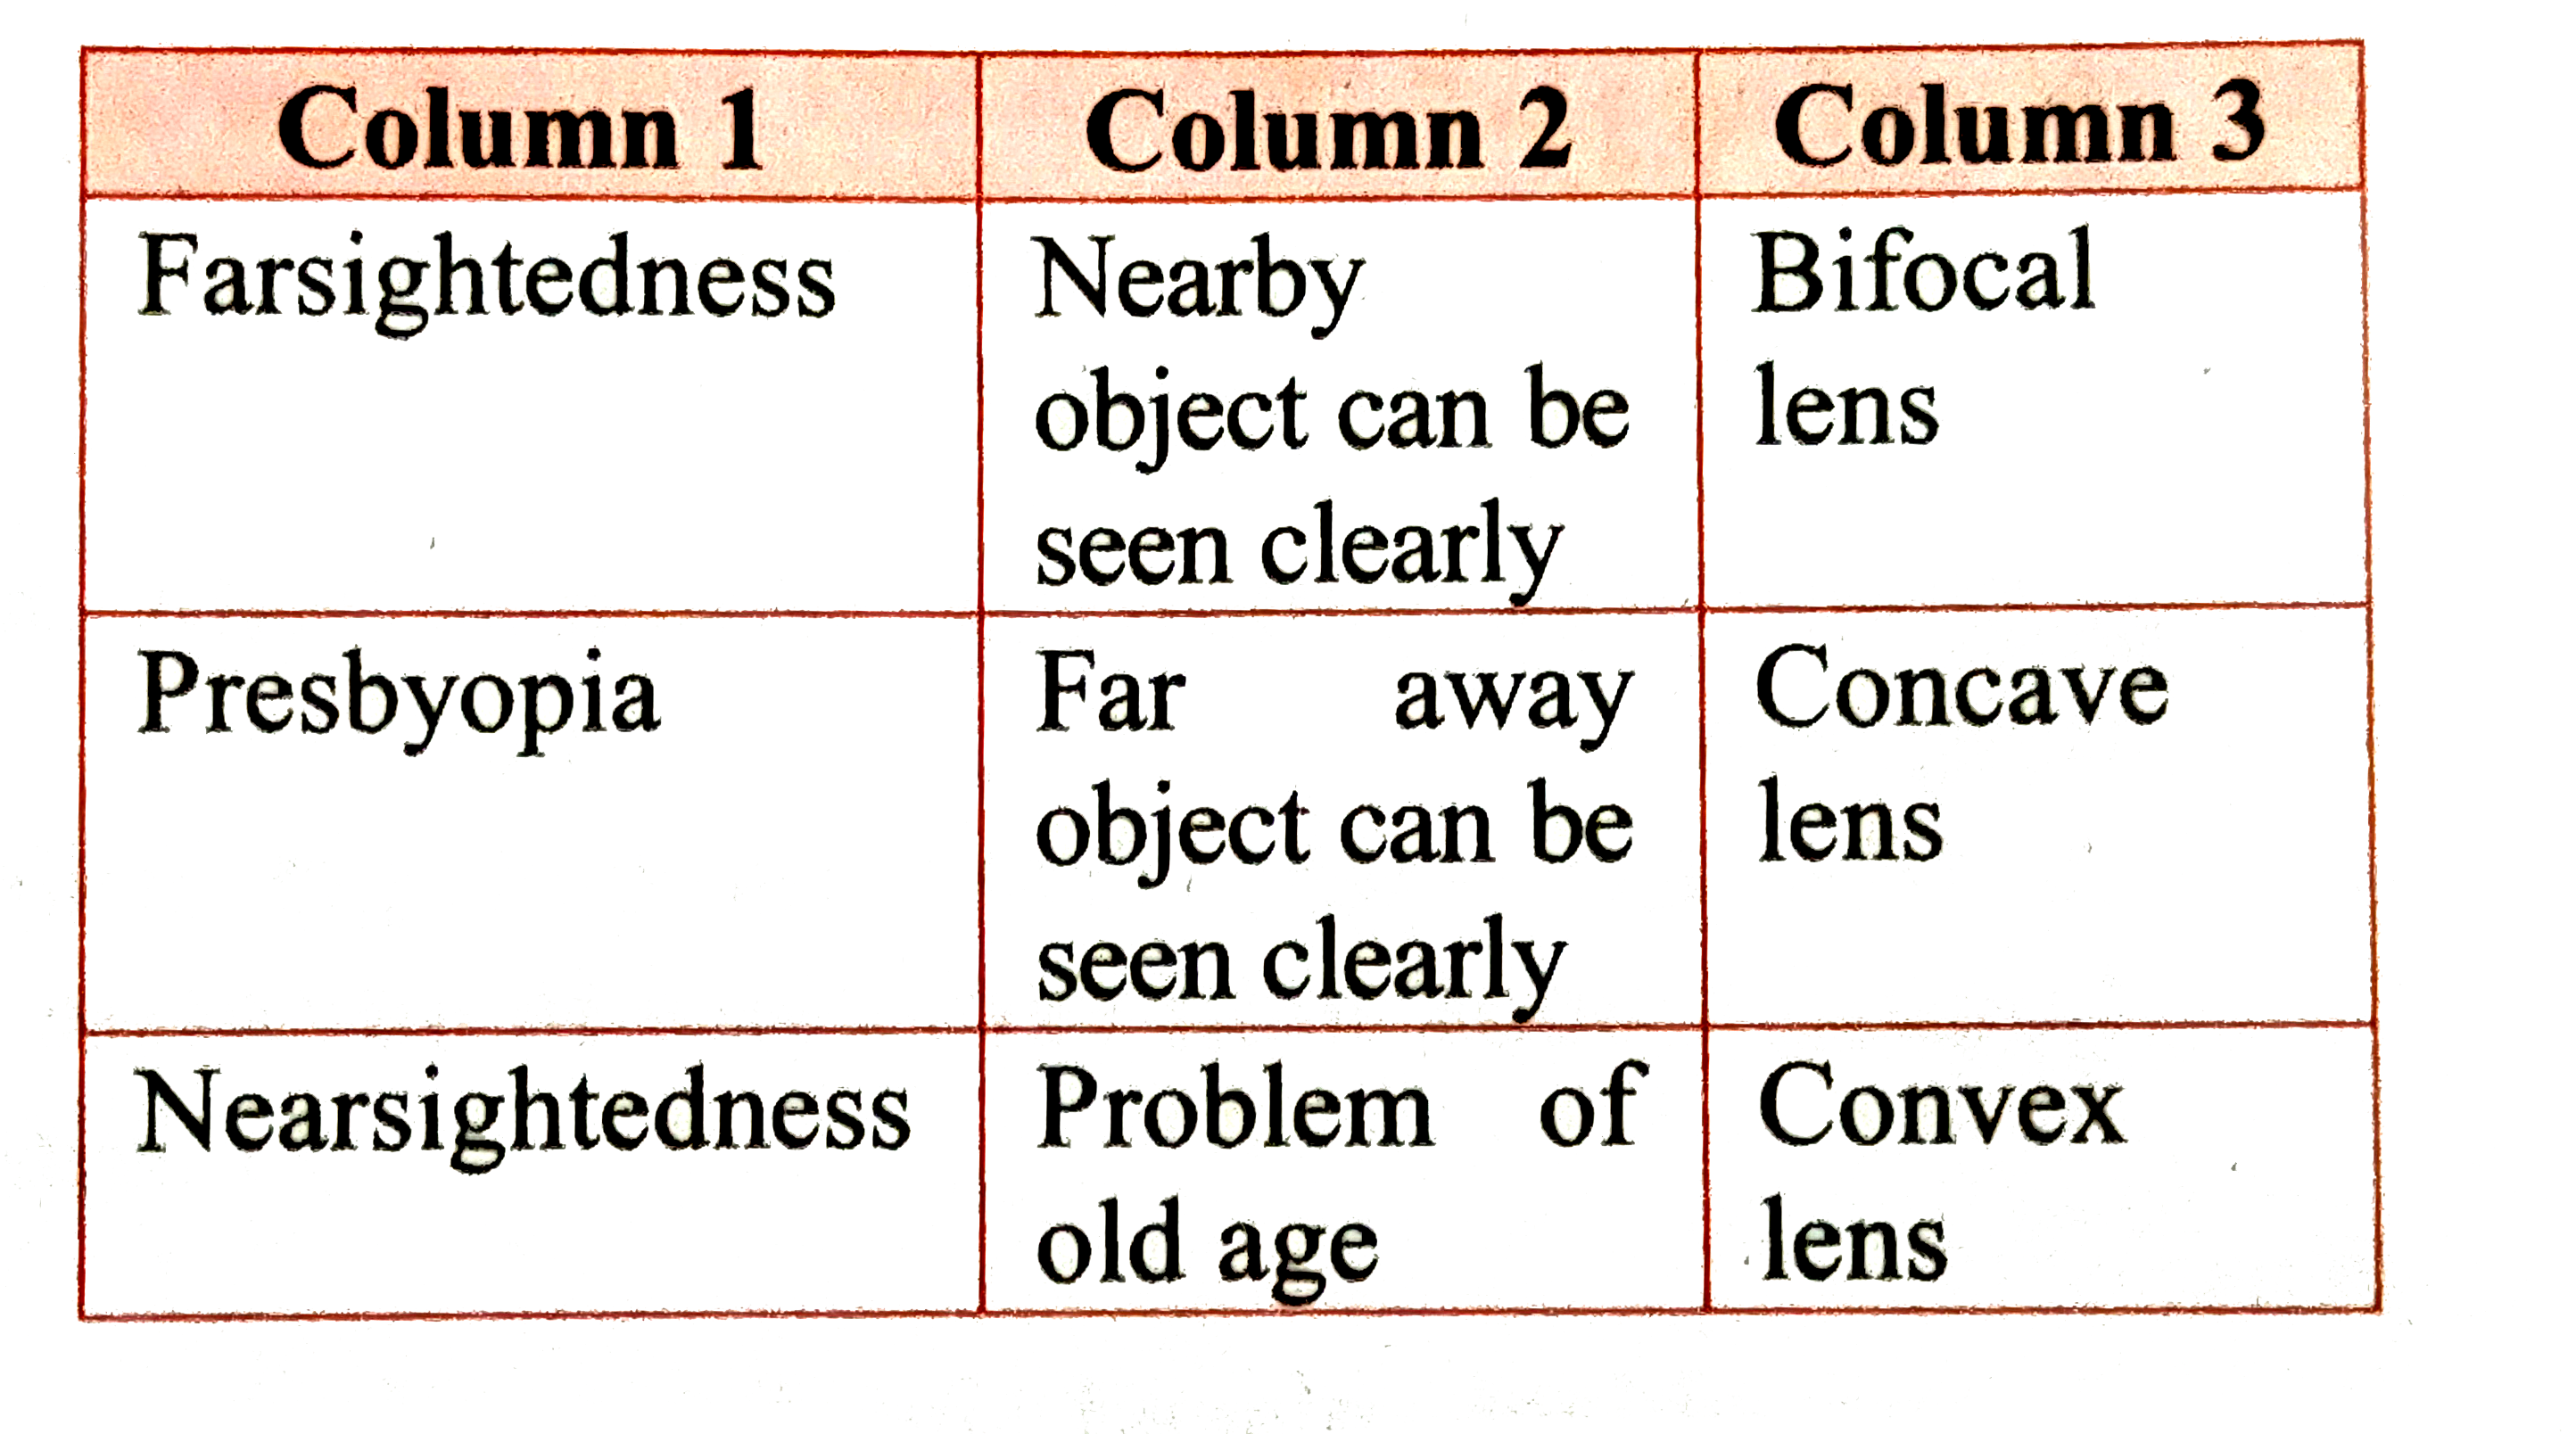 Match the columns in the following table and explain them.